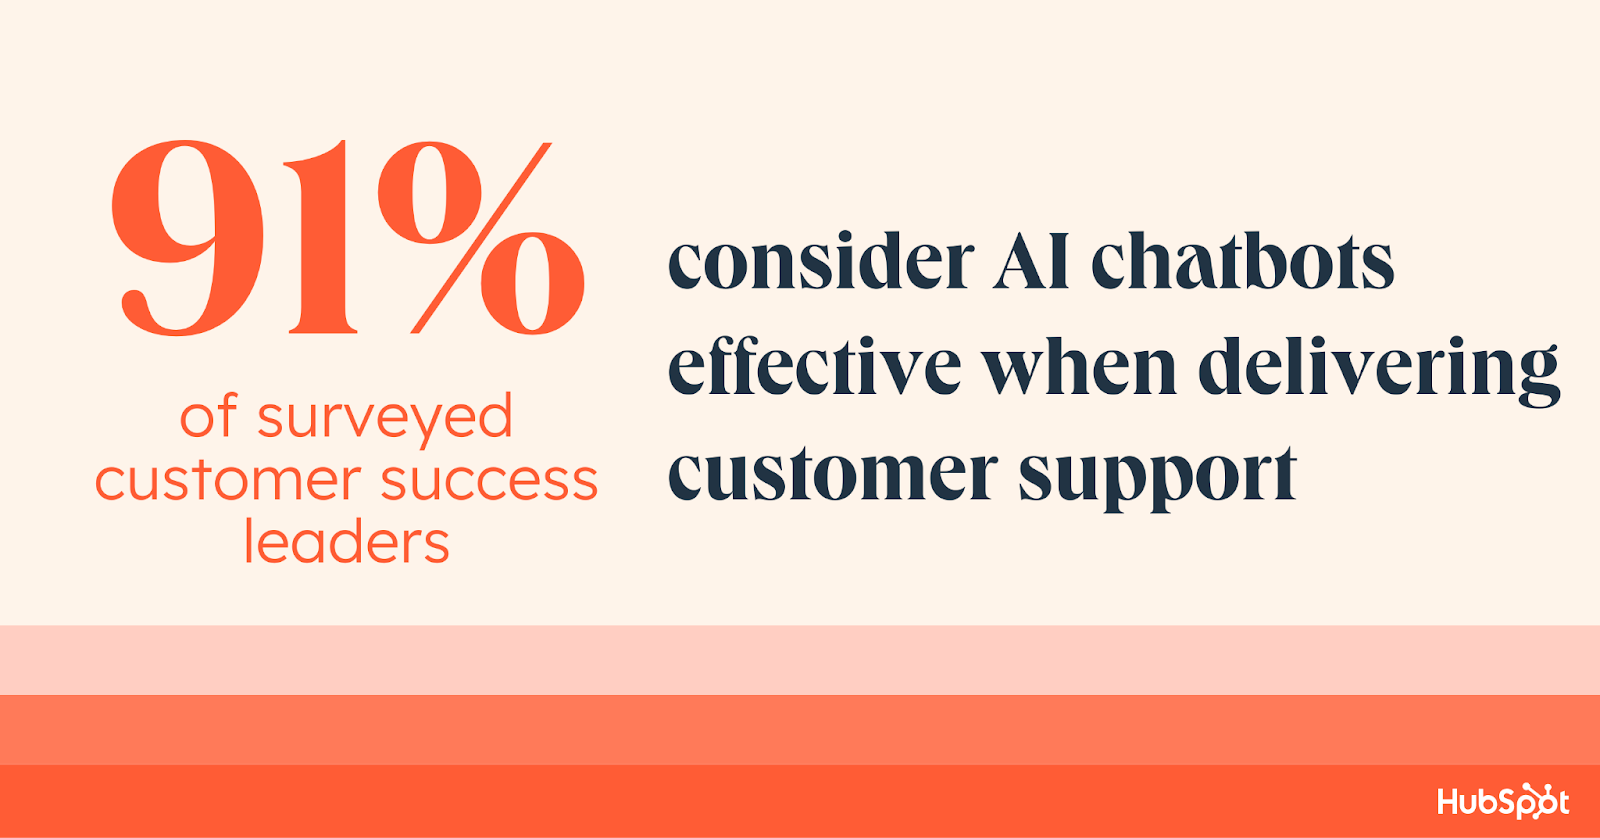 graphic showing statistic around AI chatbots for customer service